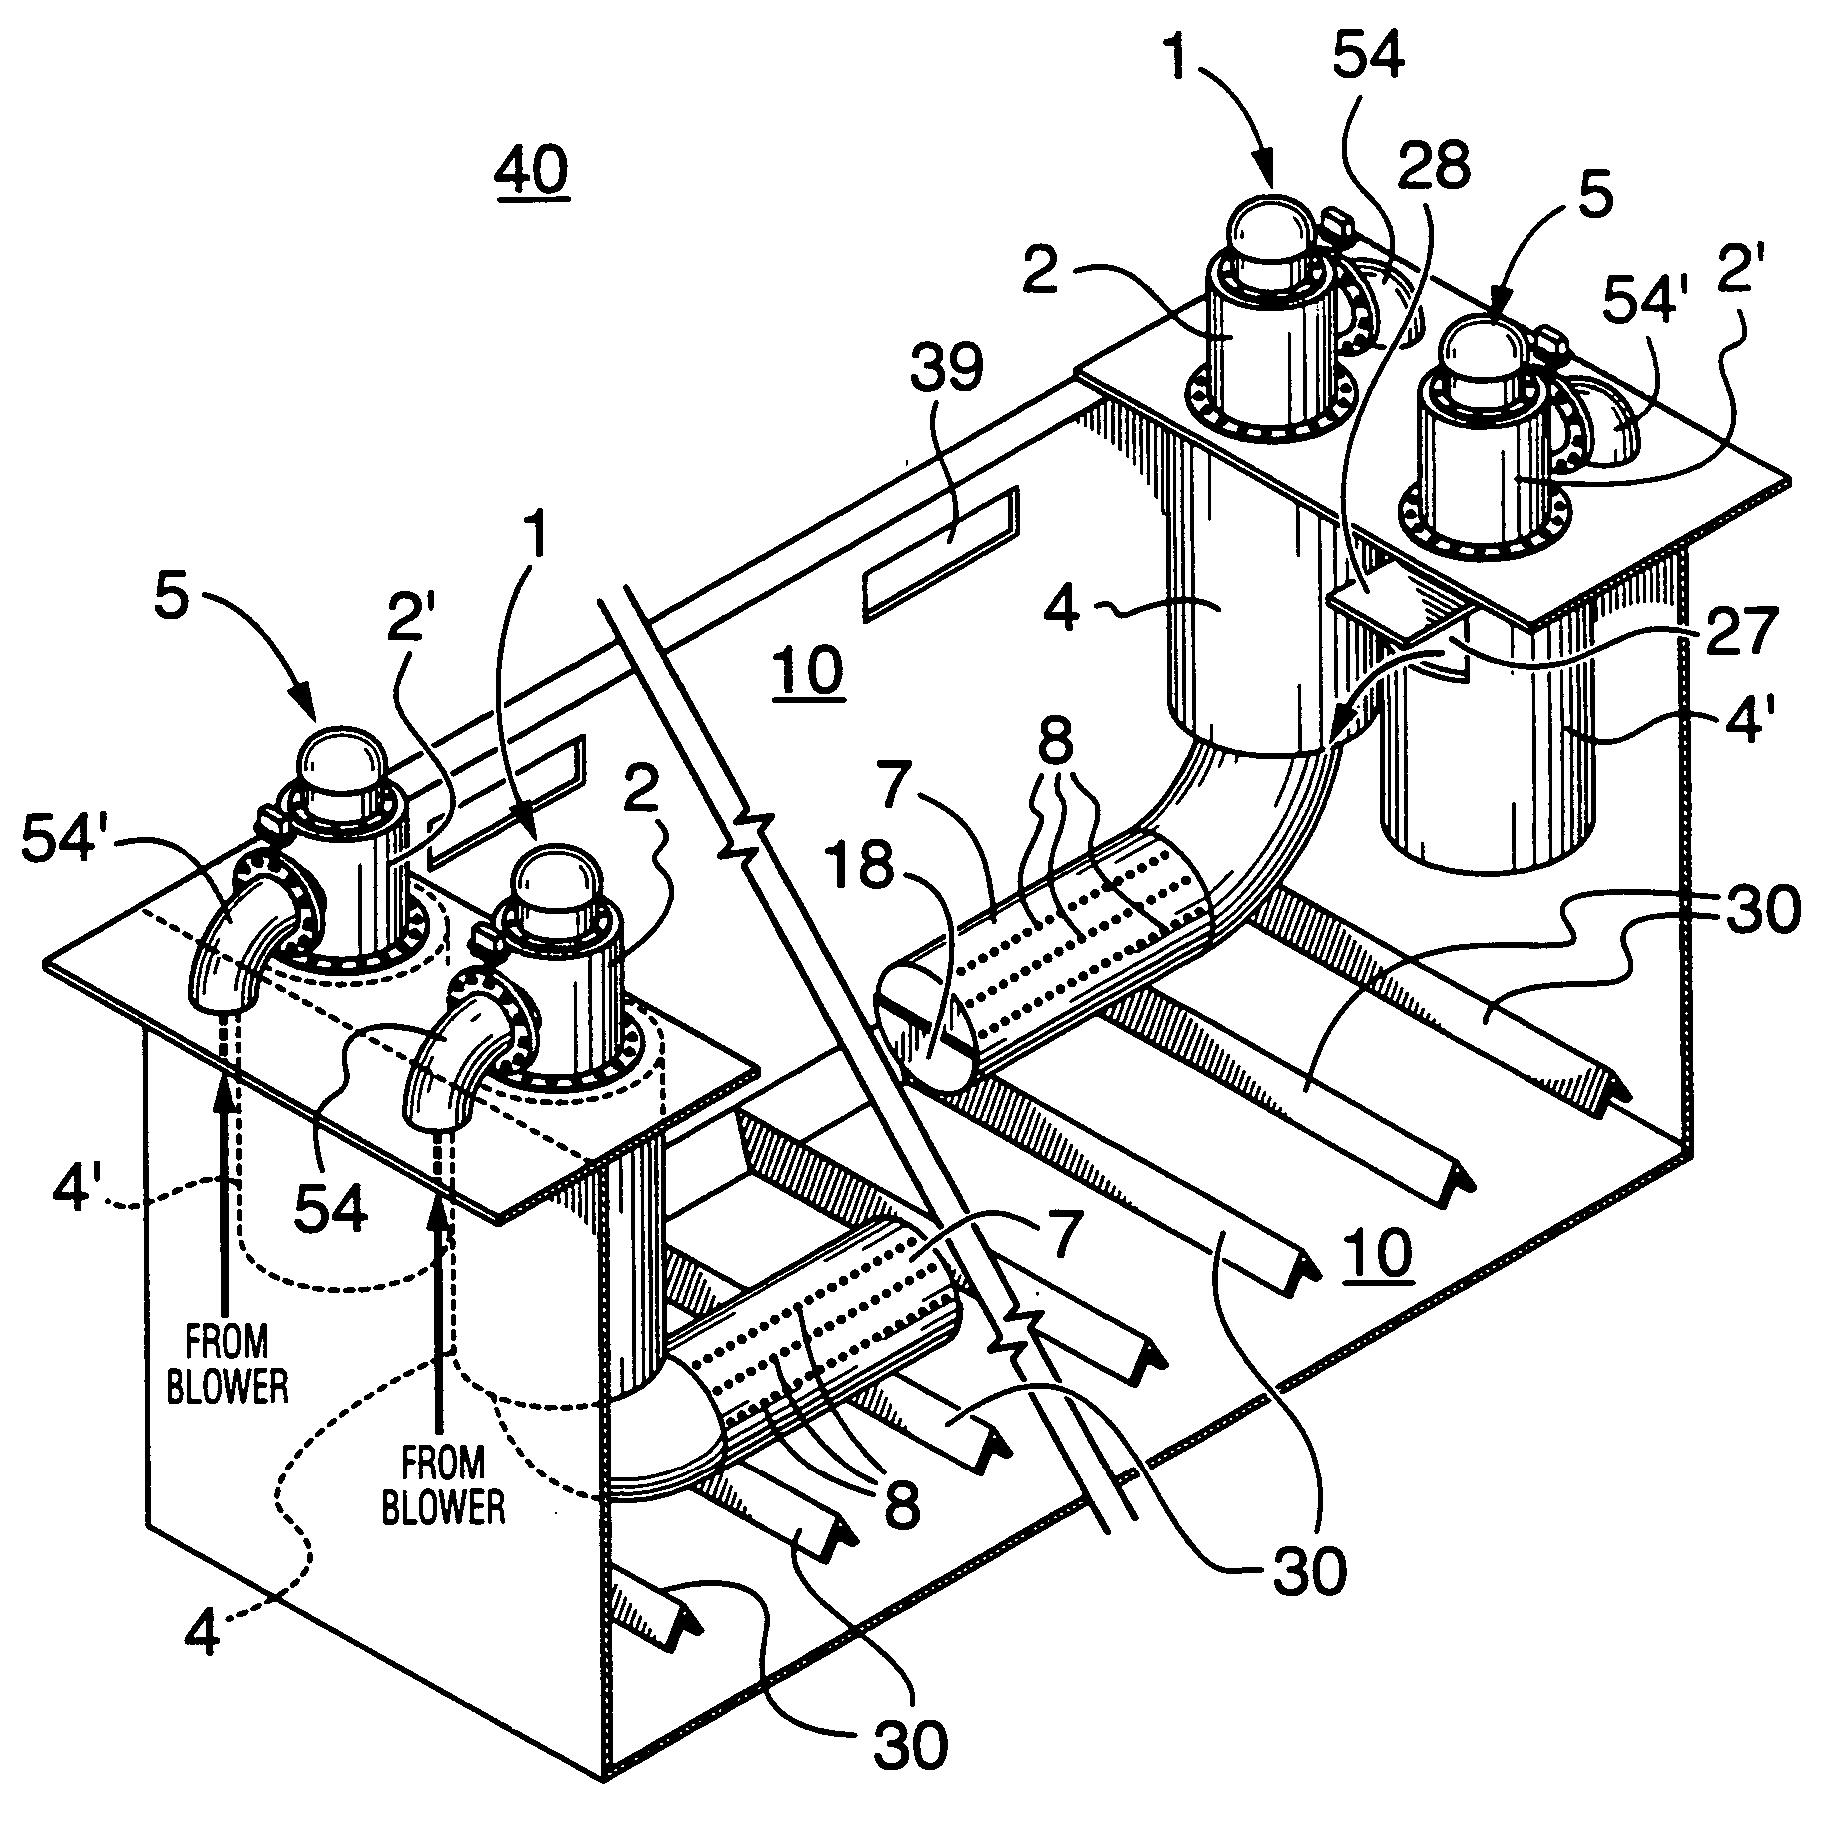 Startup burner assembly for snow melting apparatus and method of snow melting